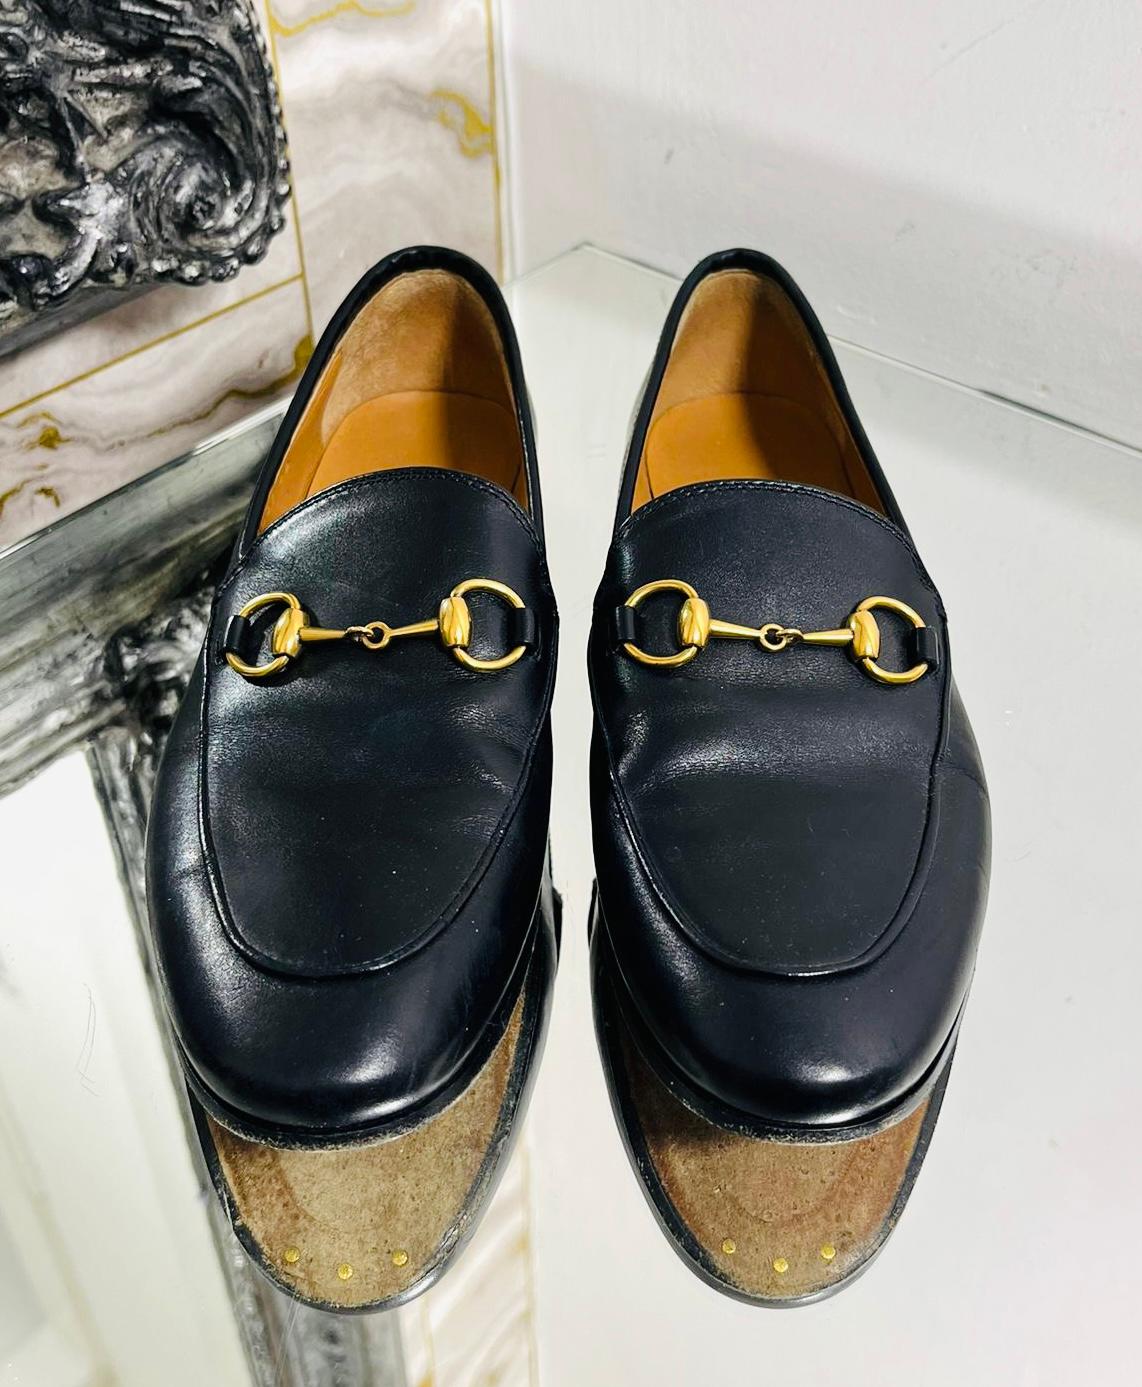 Gucci Jordaan Leather Loafers

Black, slim shaped loafers designed with the brand's signature gold Horsebit detailing.

Featuring almond toe, leather lining and soles. Rrp £850

Size – 35

Condition – Good (Scratches to the leather)

Composition –